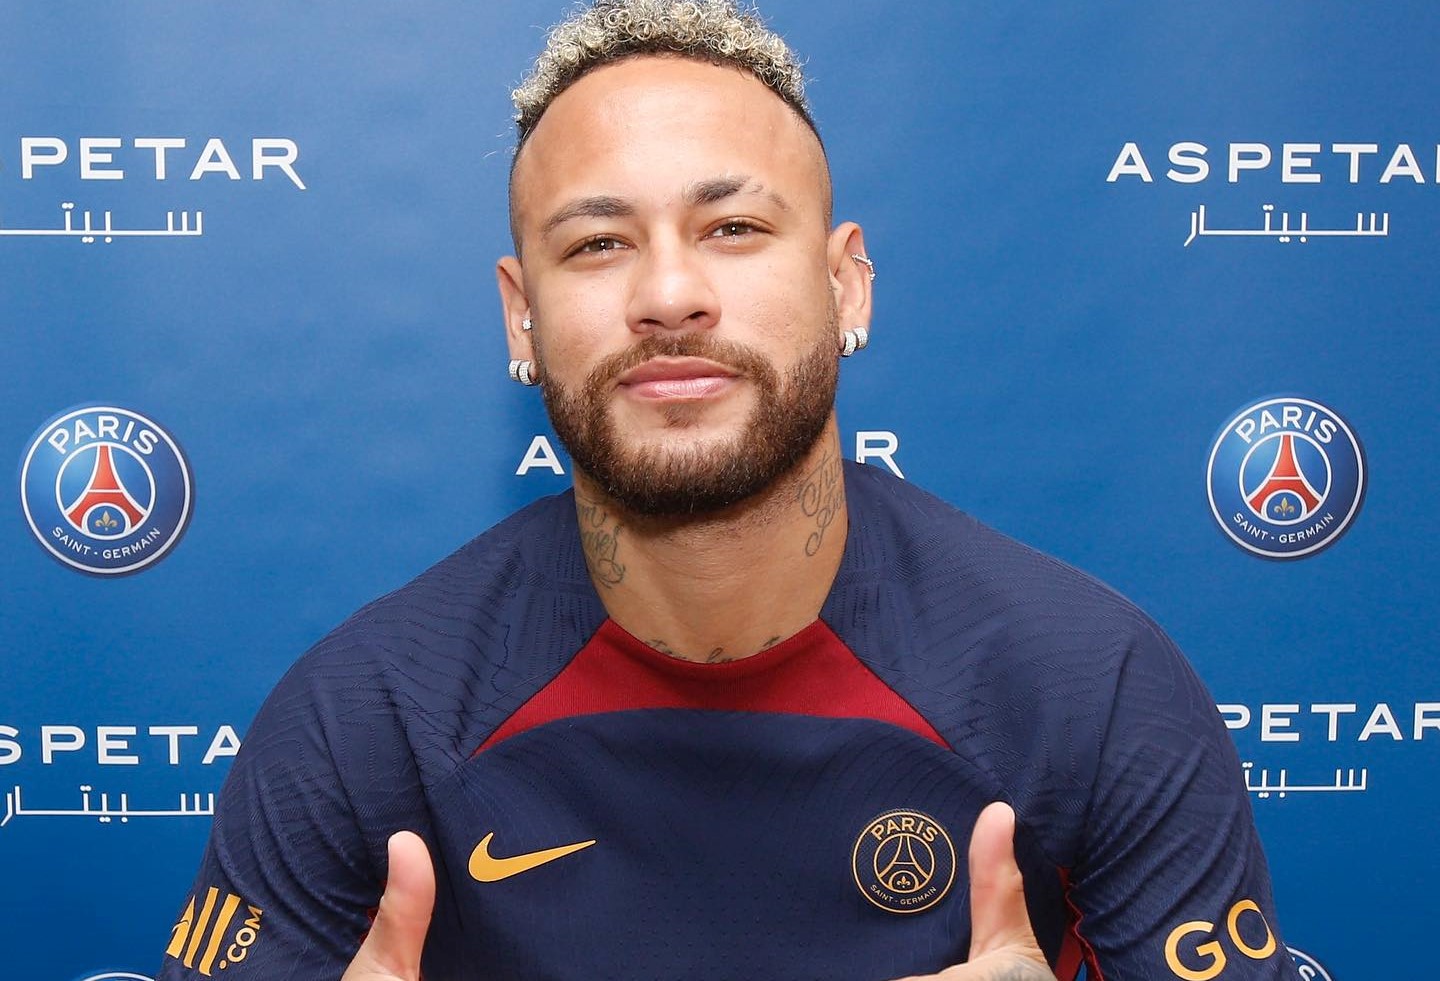 Neymar will be a player in the Al-Hilal team led by Jorge Jesus